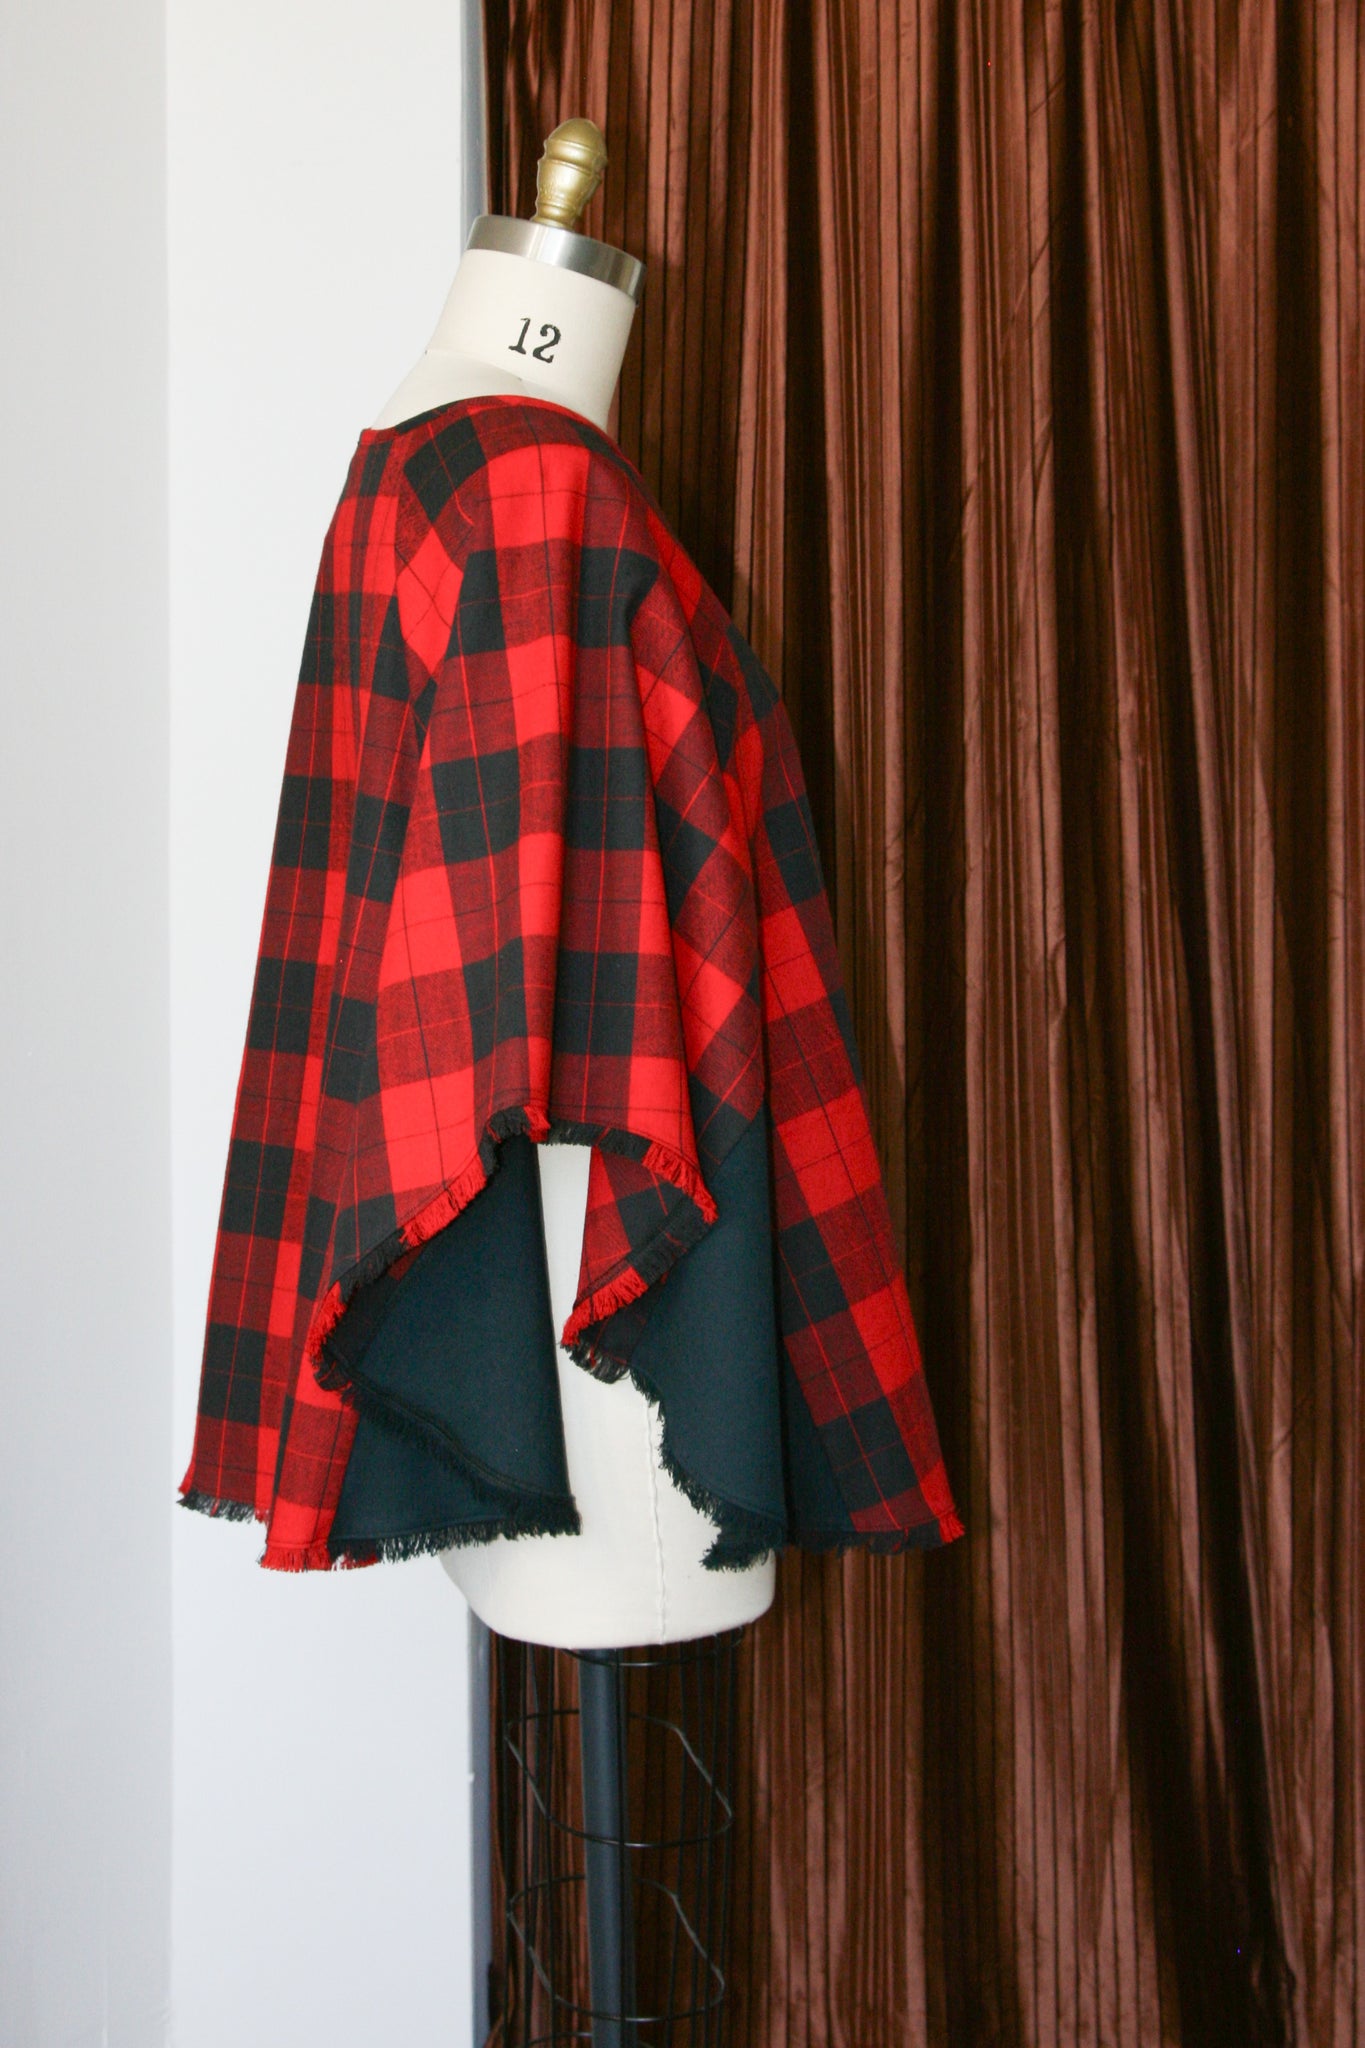 Gabe Poncho RTW in Red and Black Plaid Cotton